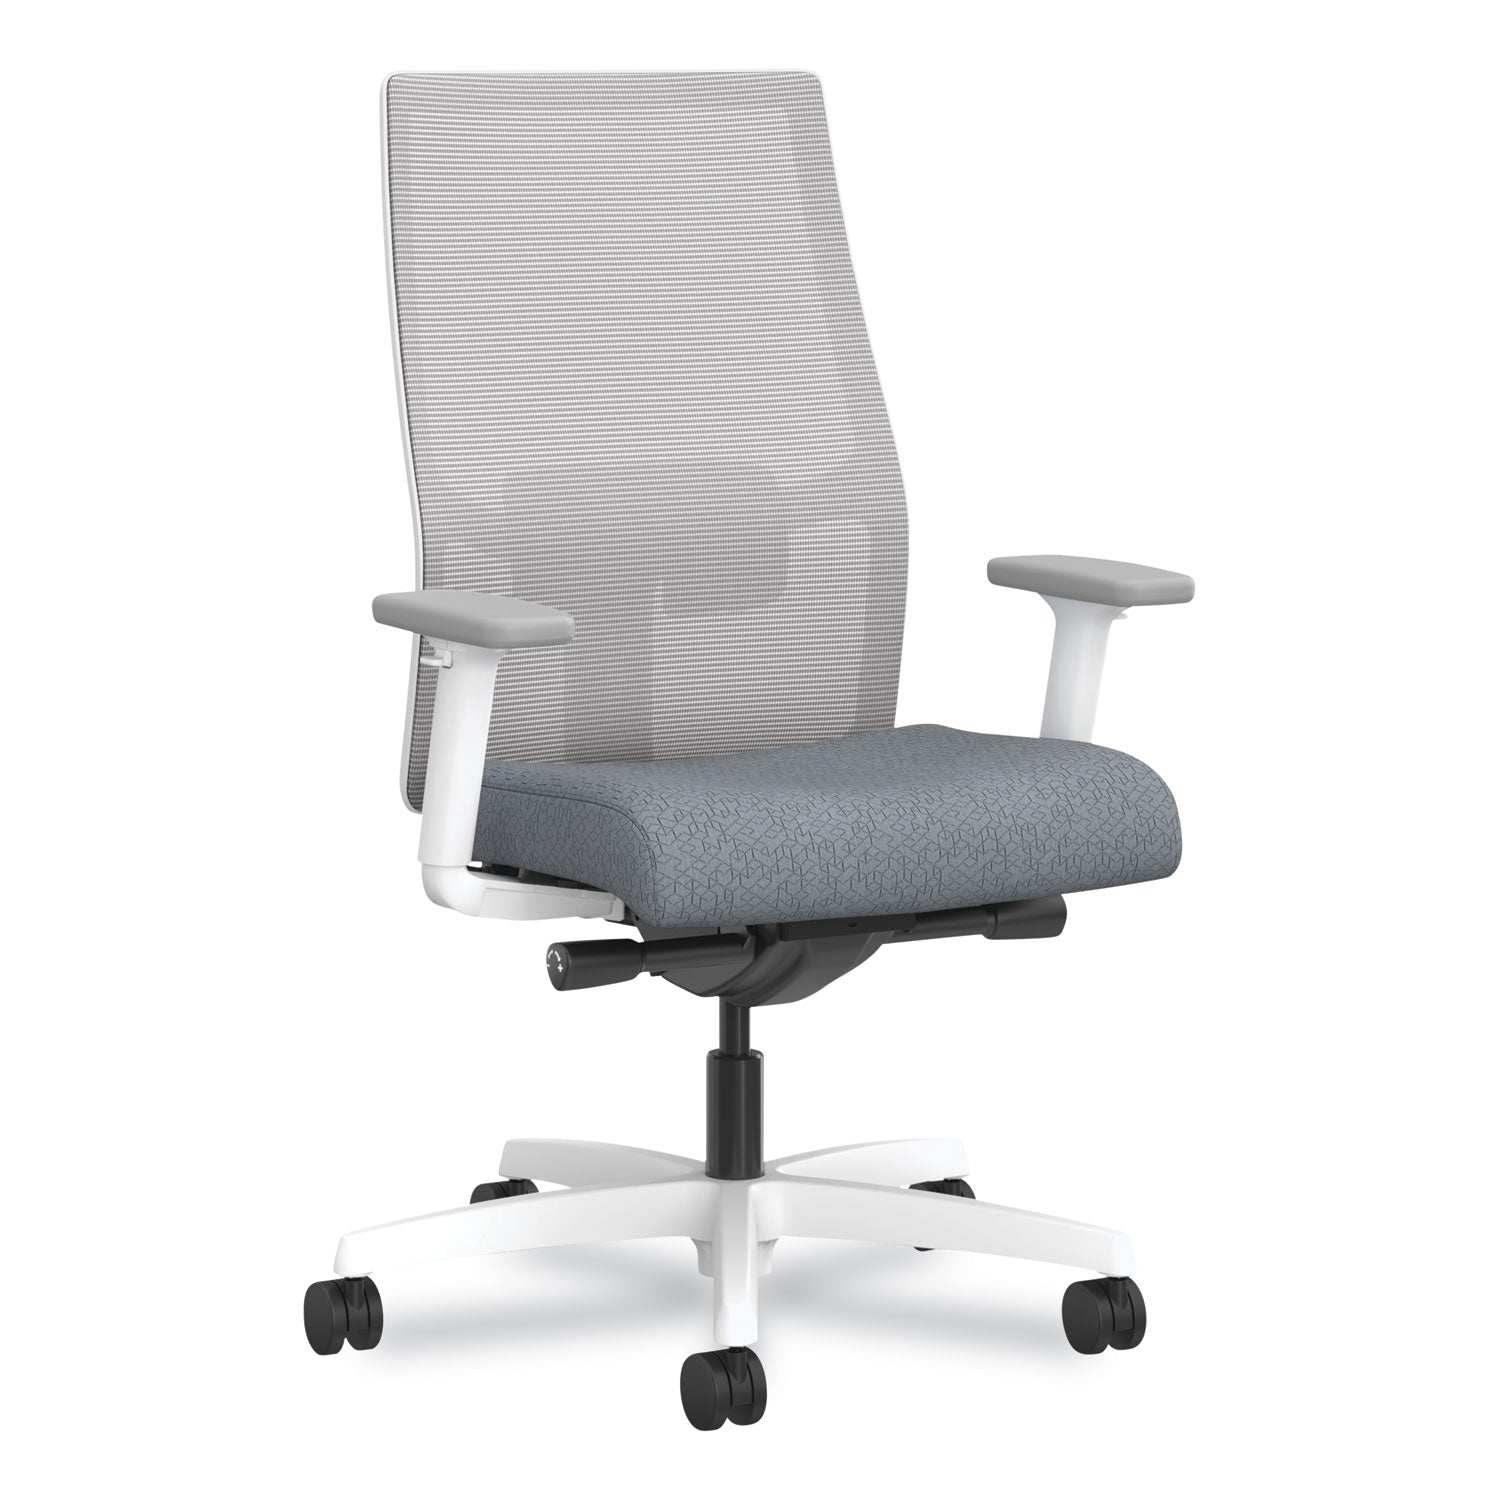 ignition-20-4-way-stretch-mid-back-mesh-task-chair-navy-blue-lumbar-support-basalt-fog-white-ships-in-7-10-business-days_honi2mm2afa25ex - 1